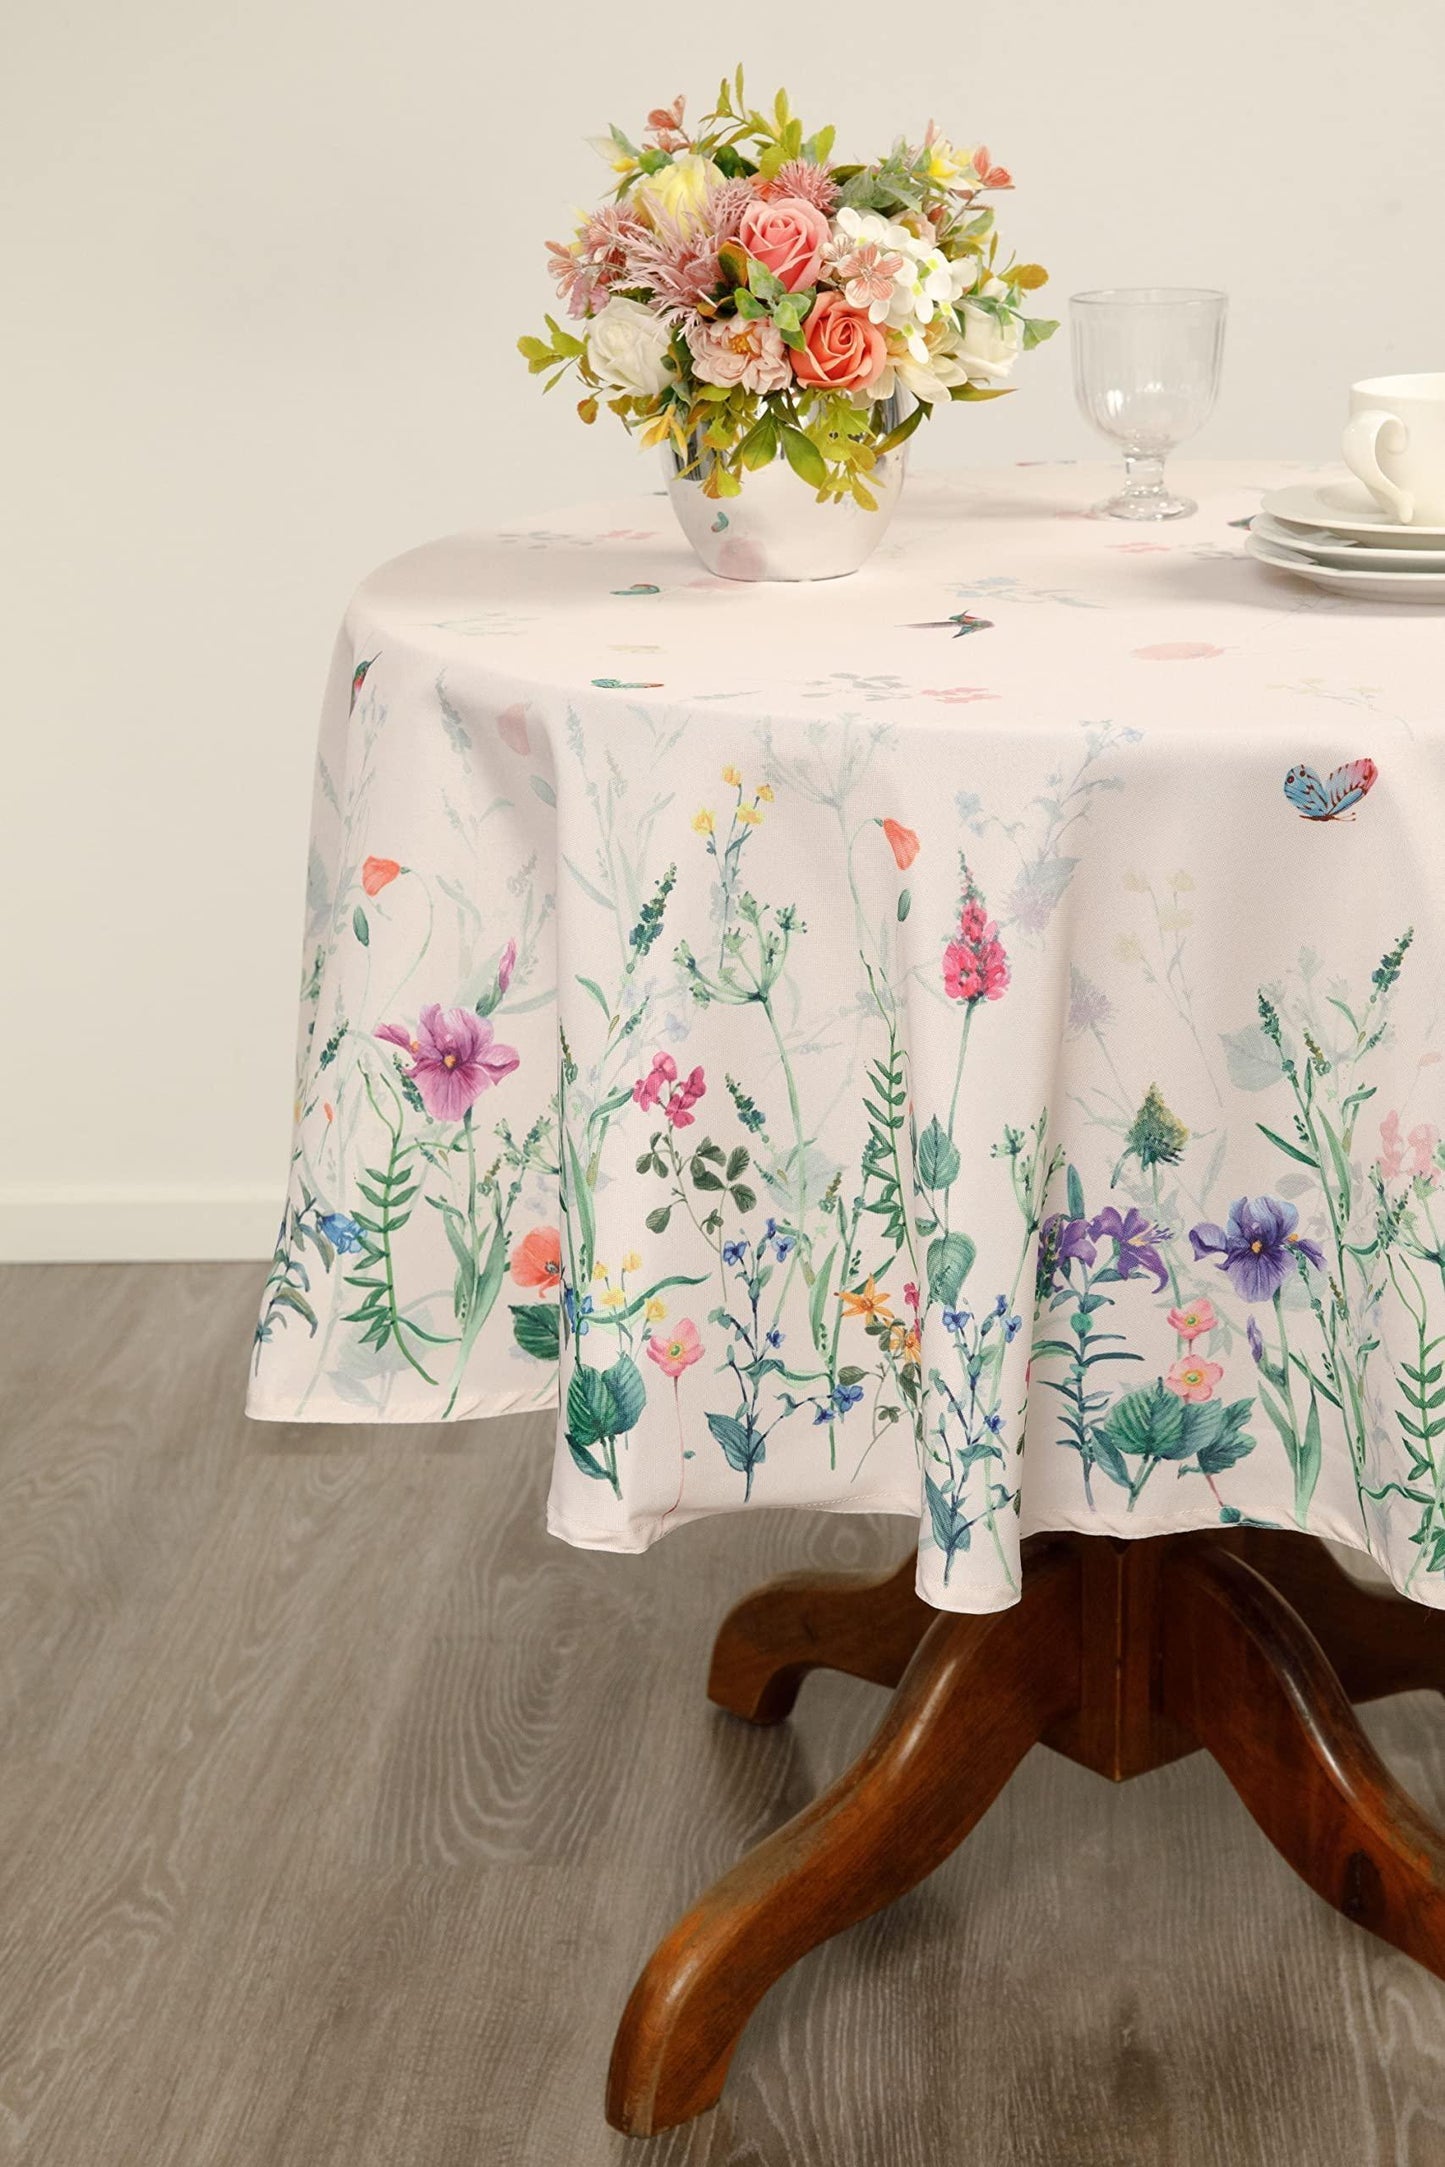 Watercolor Party Flowers Round Easter Tablecloth Non Iron Stain Resistant Easter Table Cover Kitchen Dining Room Spring Dinner Party Wedding Decorations Round 60 - Loomini